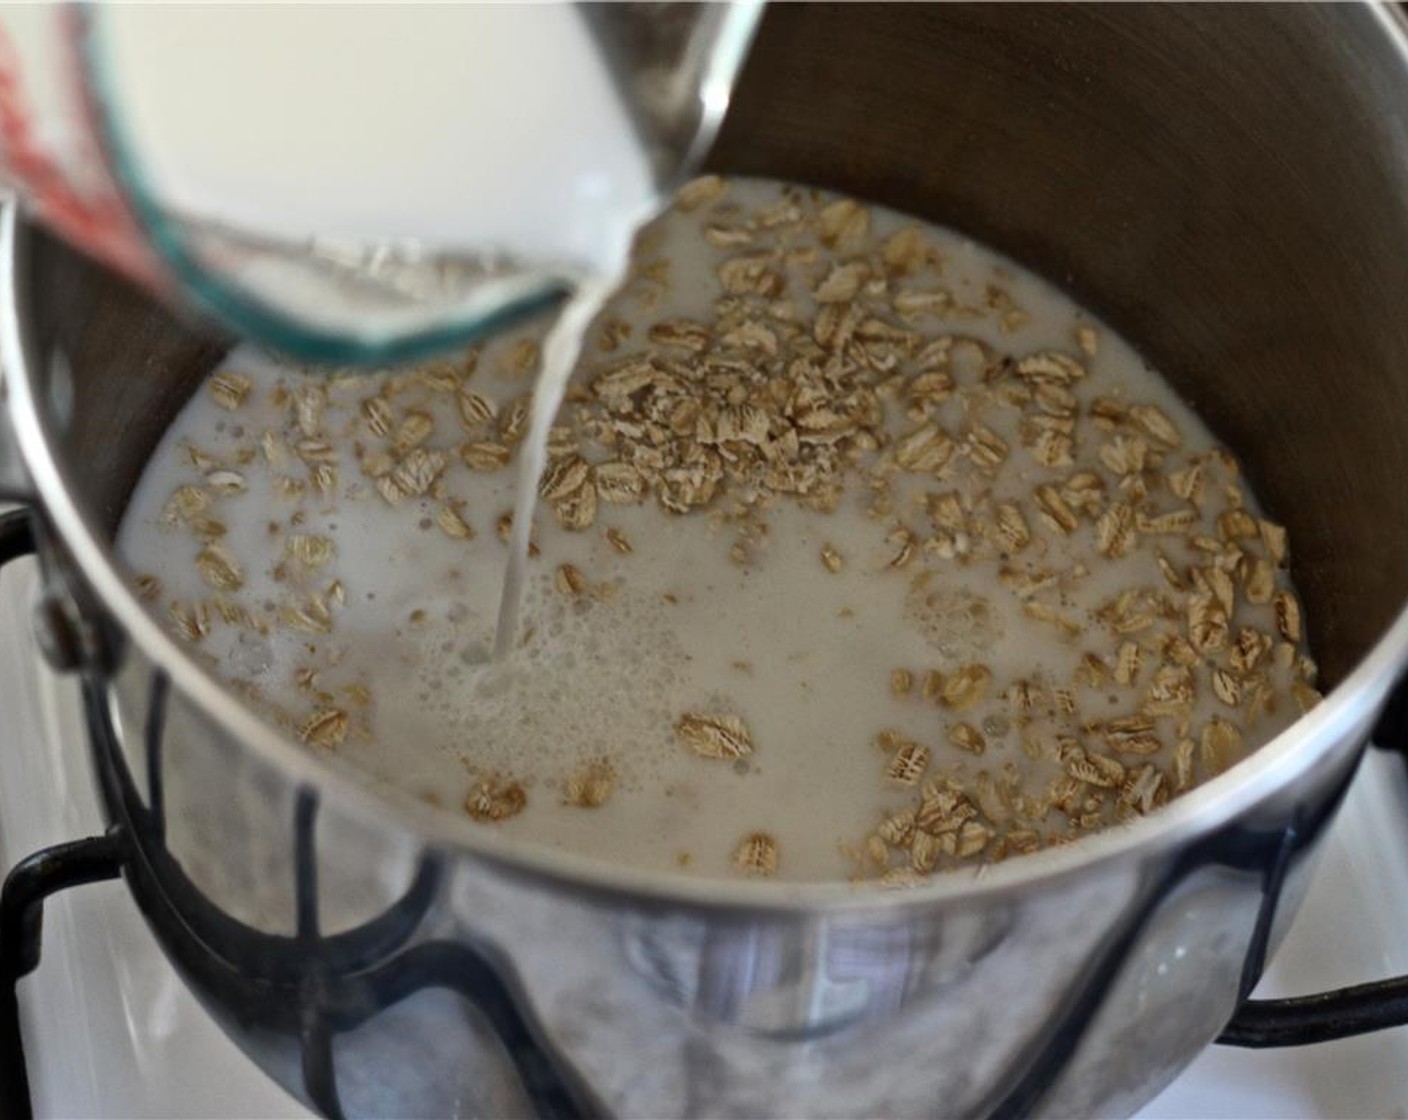 step 1 Combine the Milk (1/2 cup), Water (1/2 cup), Quick Cooking Oats (1/2 cup), Vanilla Extract (1/4 tsp), and Salt (1/8 tsp) in a medium pot. Bring to a boil, then reduce to a simmer and whisk for about 3-5 minutes, until the mixture begins to thicken.